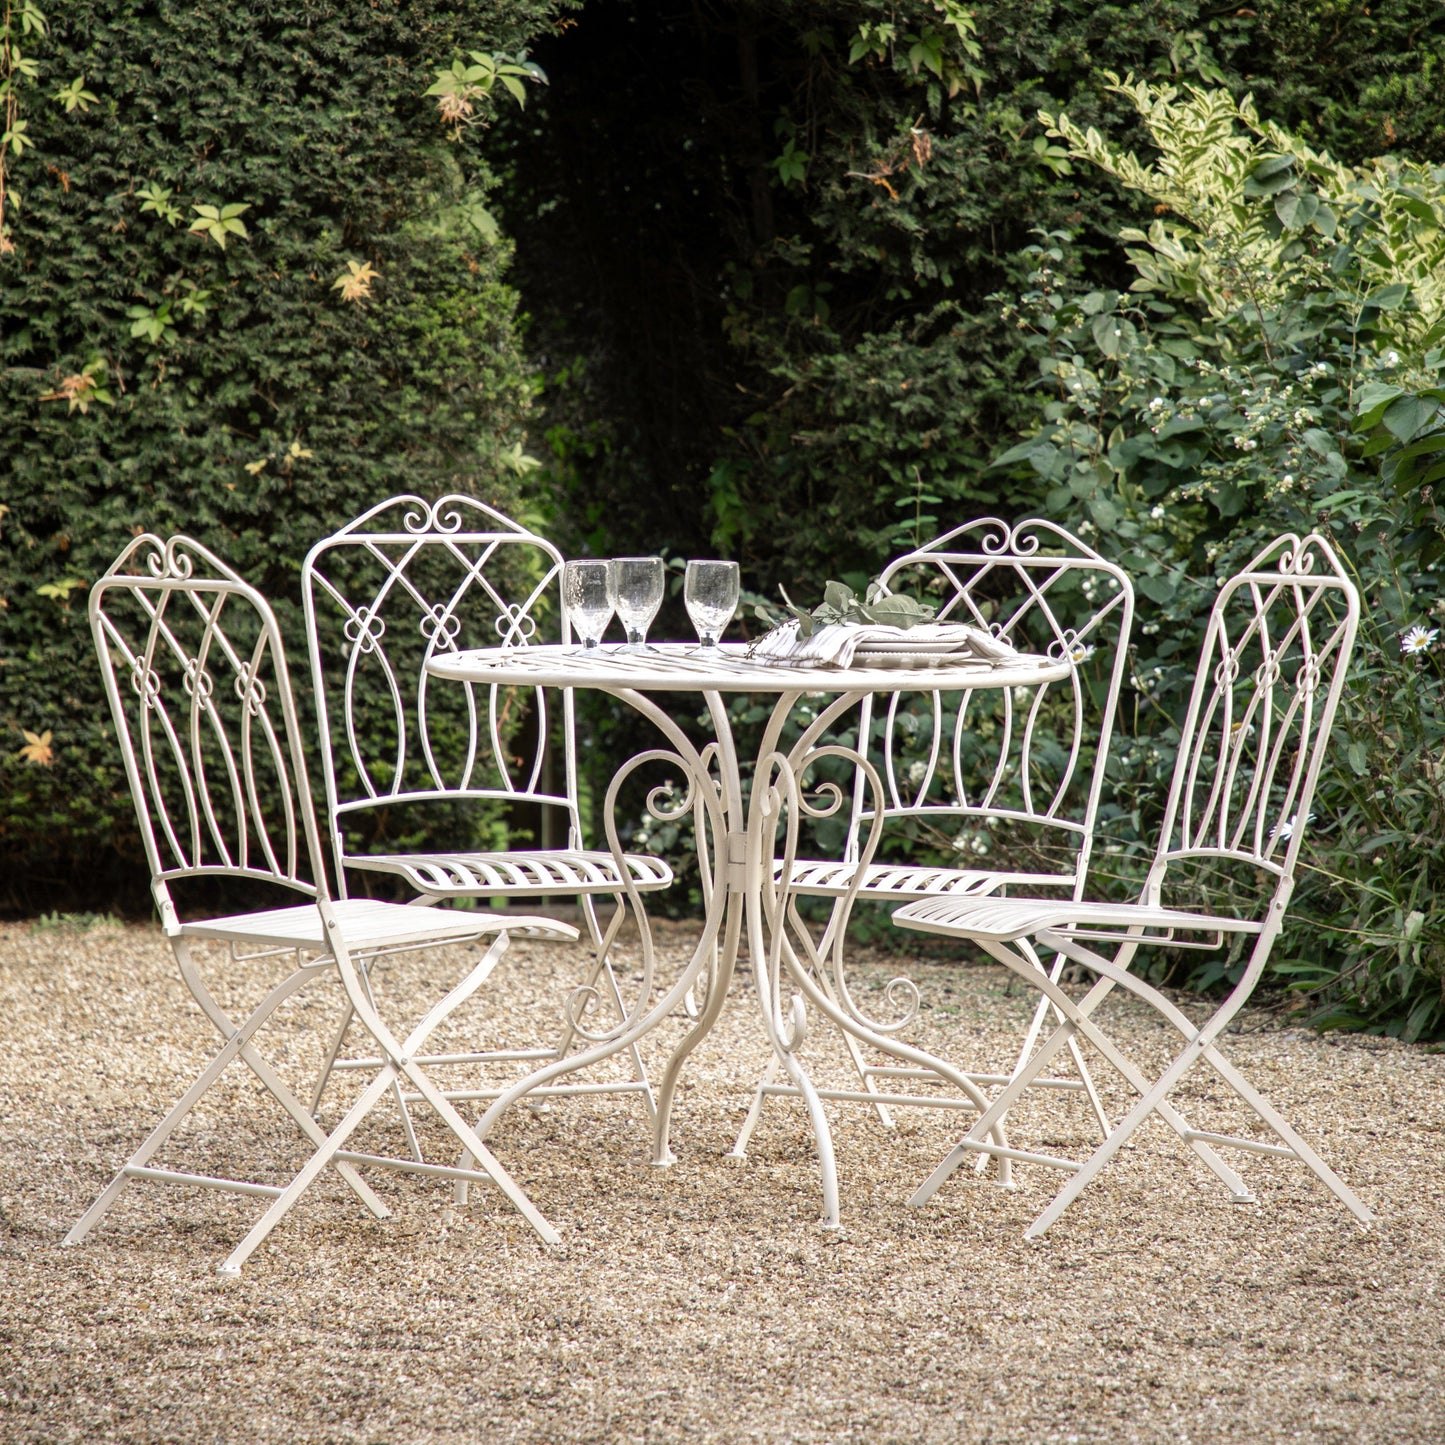 A Portlemouth 4 Seater Bistro Set Vanilla table and chairs in a garden from Kikiathome.co.uk, perfect for both interior decor and home furniture.